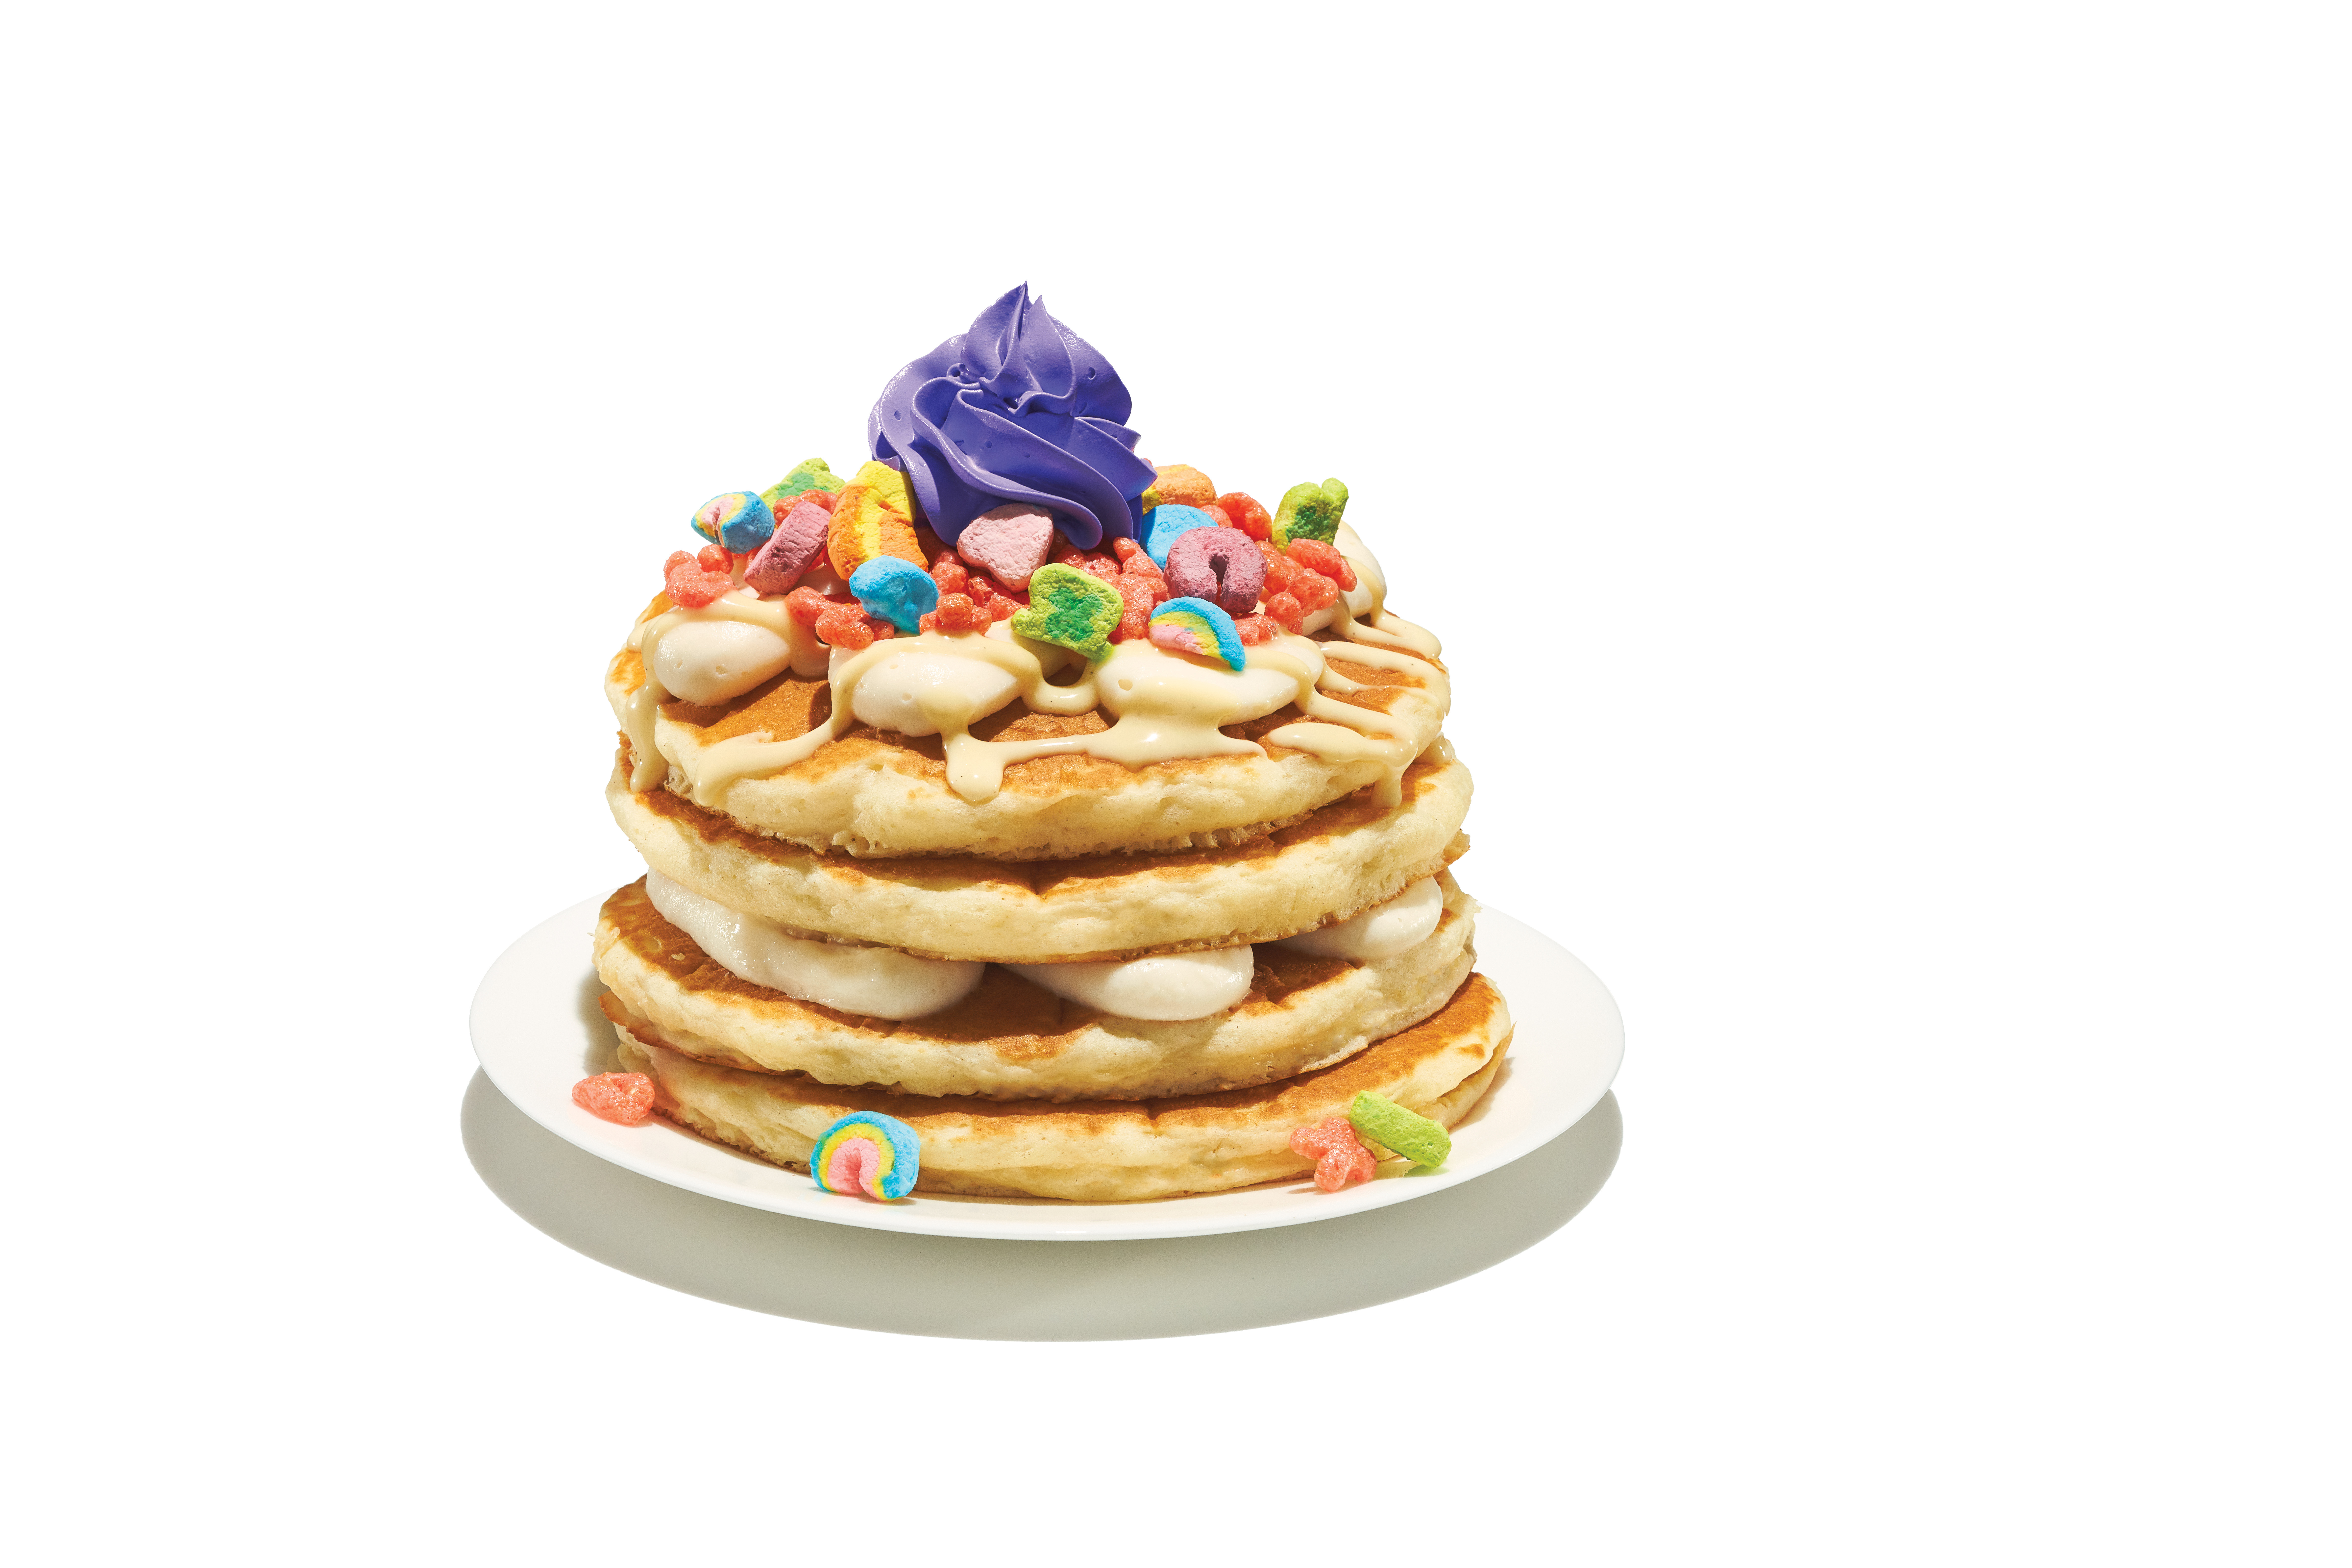 IHOP® Introduces Cereal Pancakes: Eye-Catching and Delicious